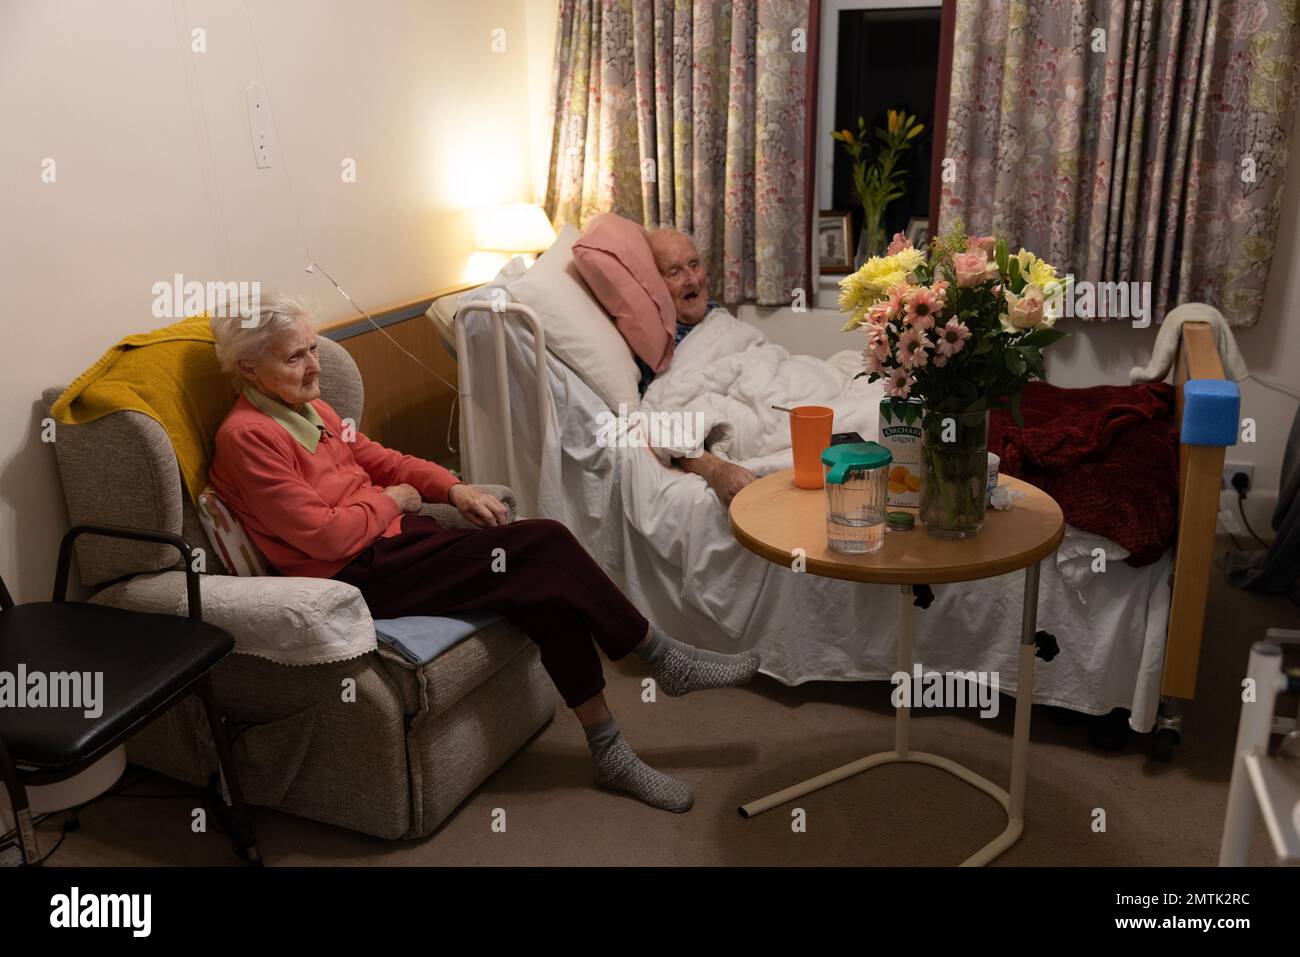 Elderly couple in the eighties together in a residents nursing home bedroom, England, UK Stock Photo